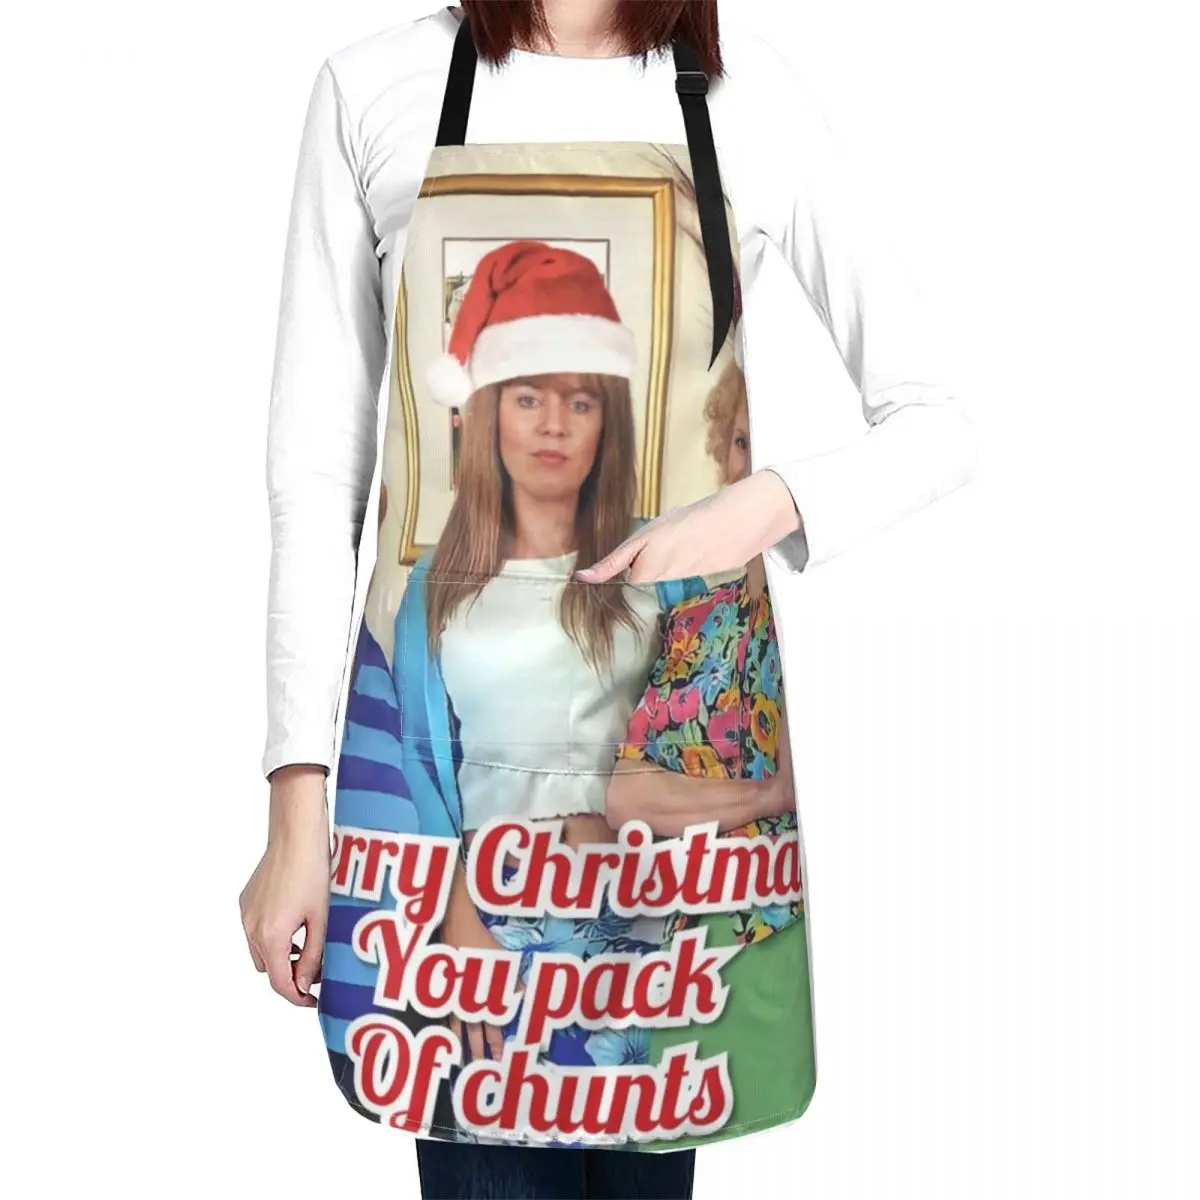 

Copy of Merry Christmas you pack of chunts Apron Men gift chef costume